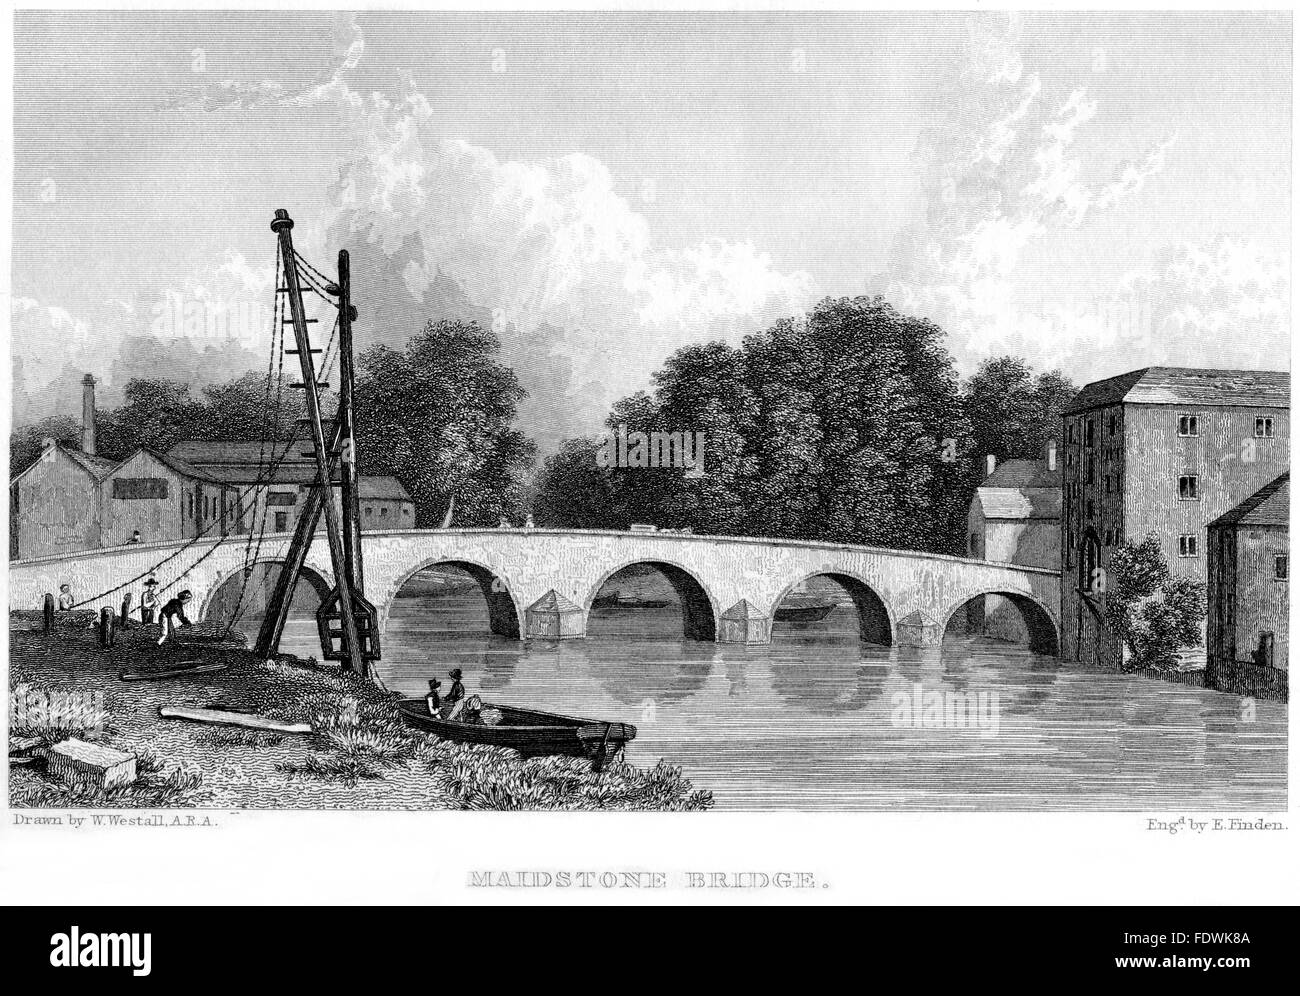 An engraving of Maidstone Bridge scanned at high resolution from a book printed in 1834. Believed copyright free. Stock Photo